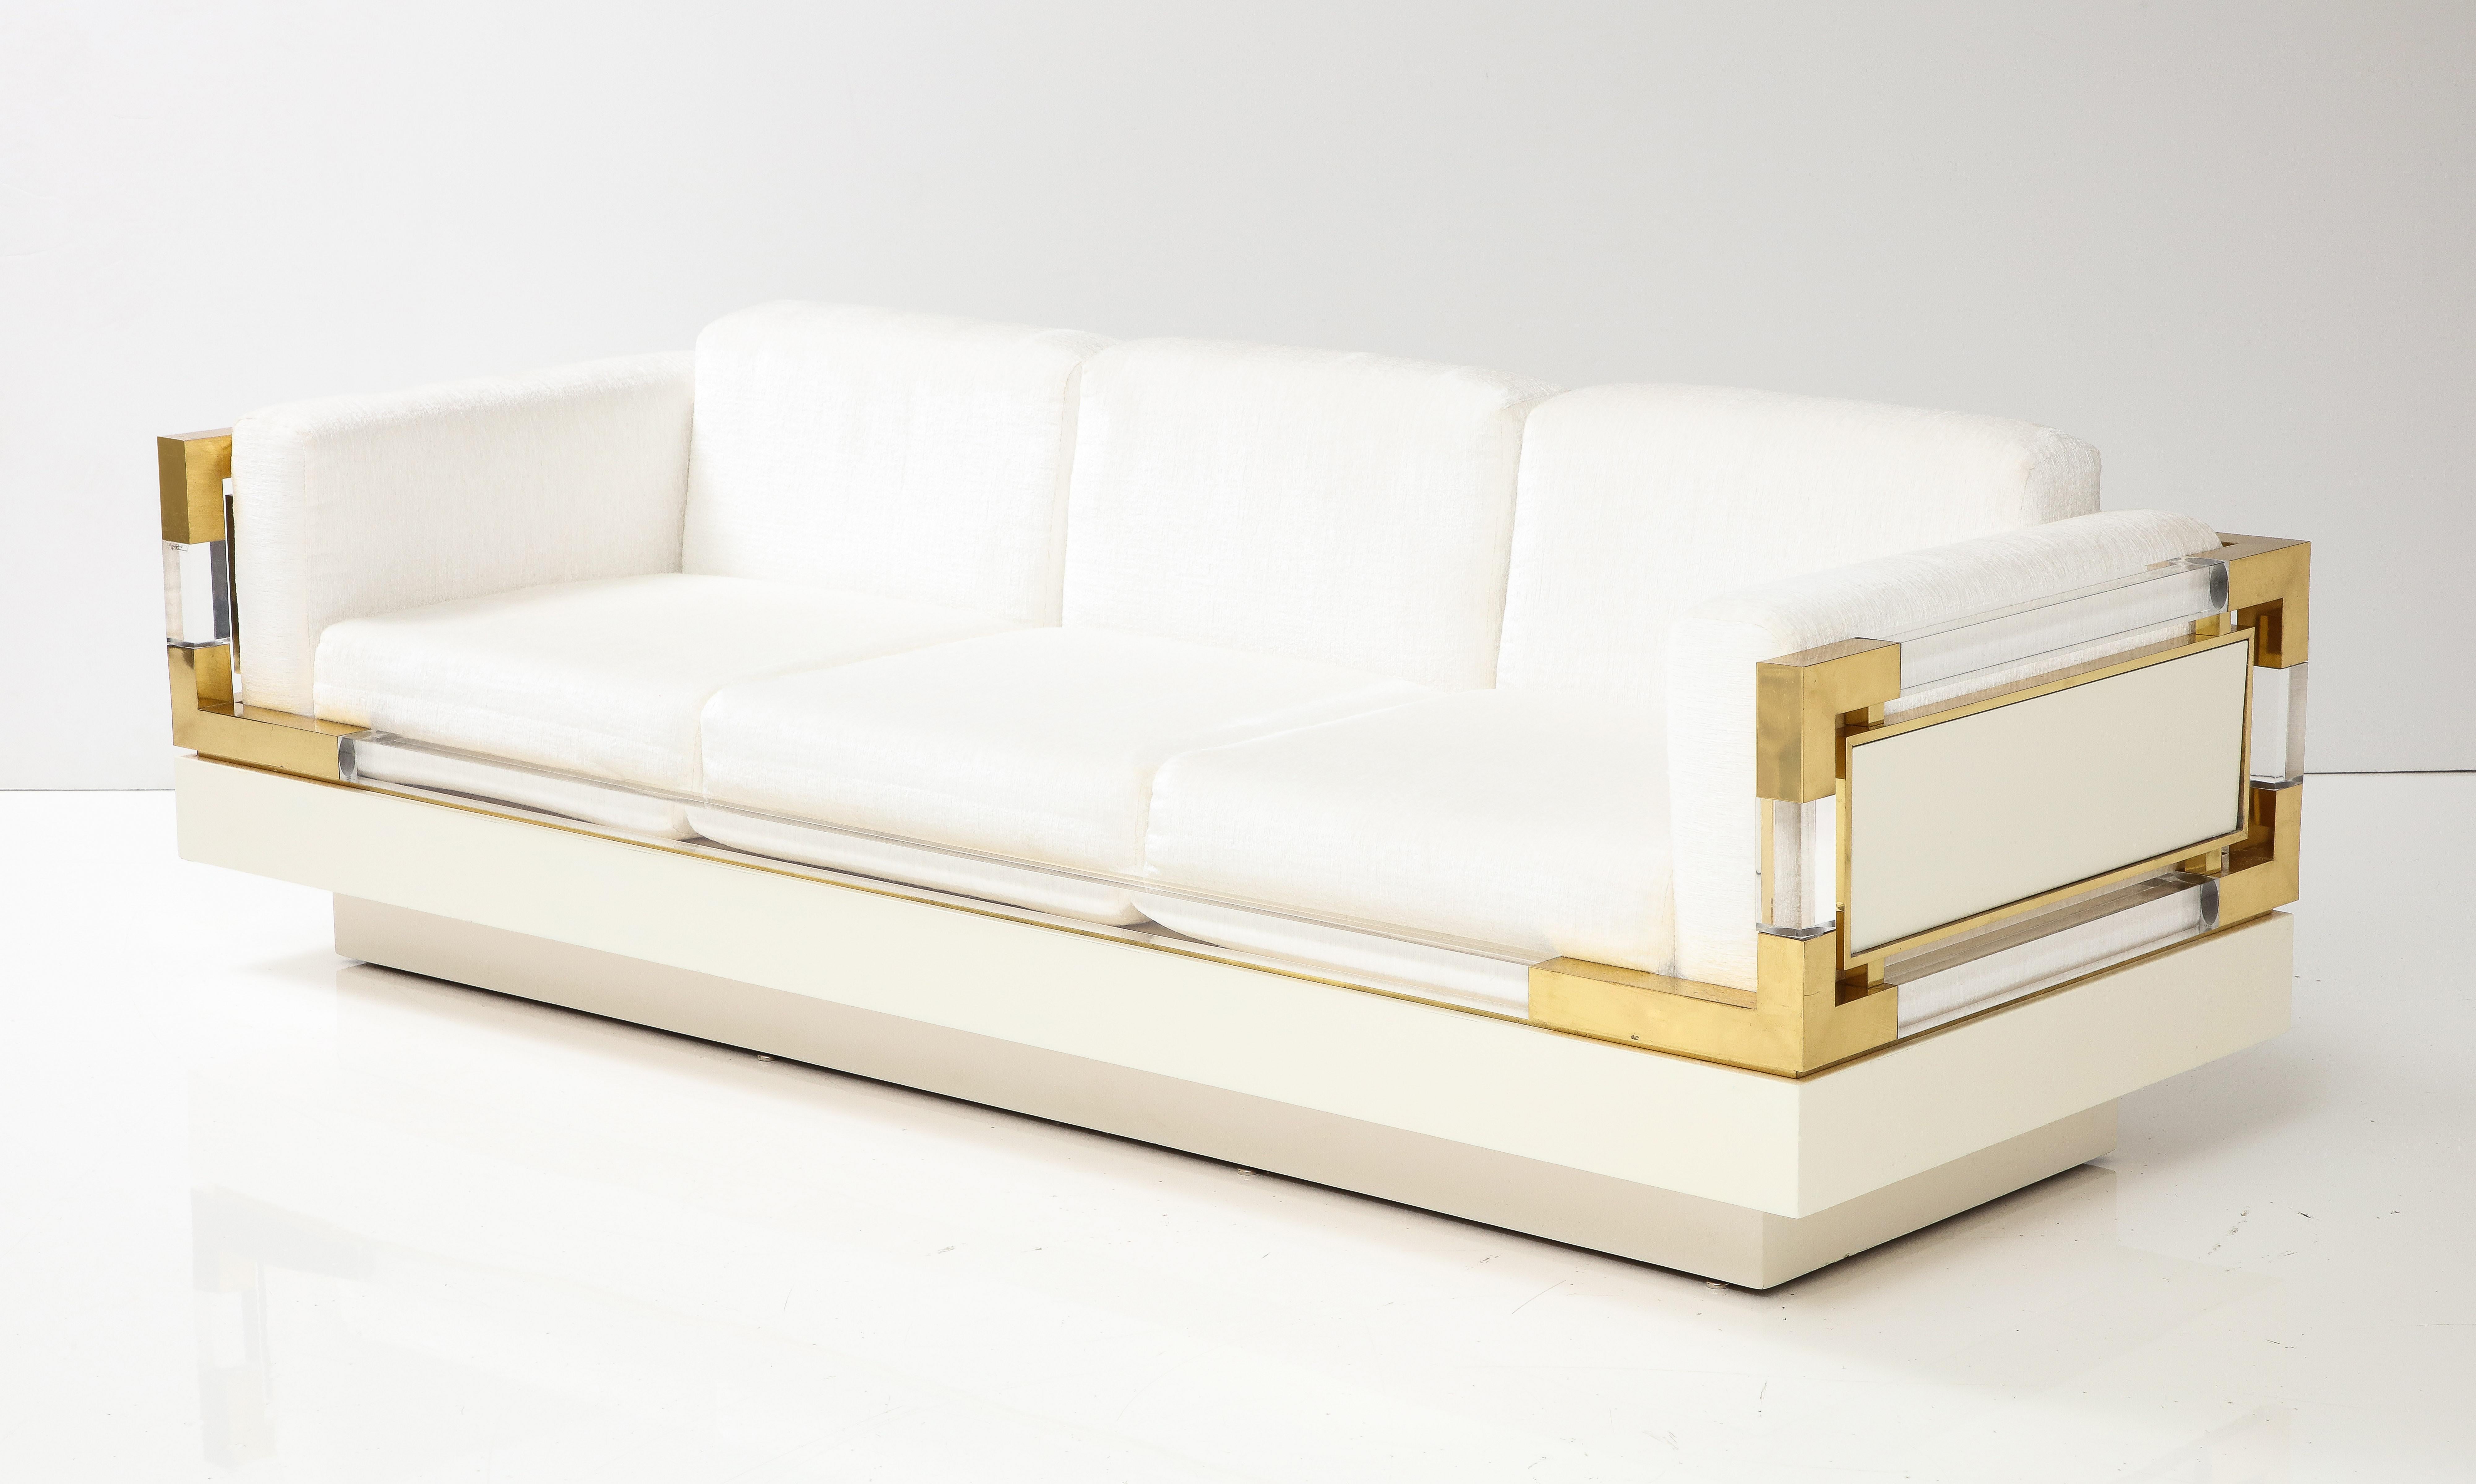 Rare 1980's Lucite and Brass sofa by Fabian.
The Brass and lucite  sofa has wonderful linear lines and sits on a plinth base.
